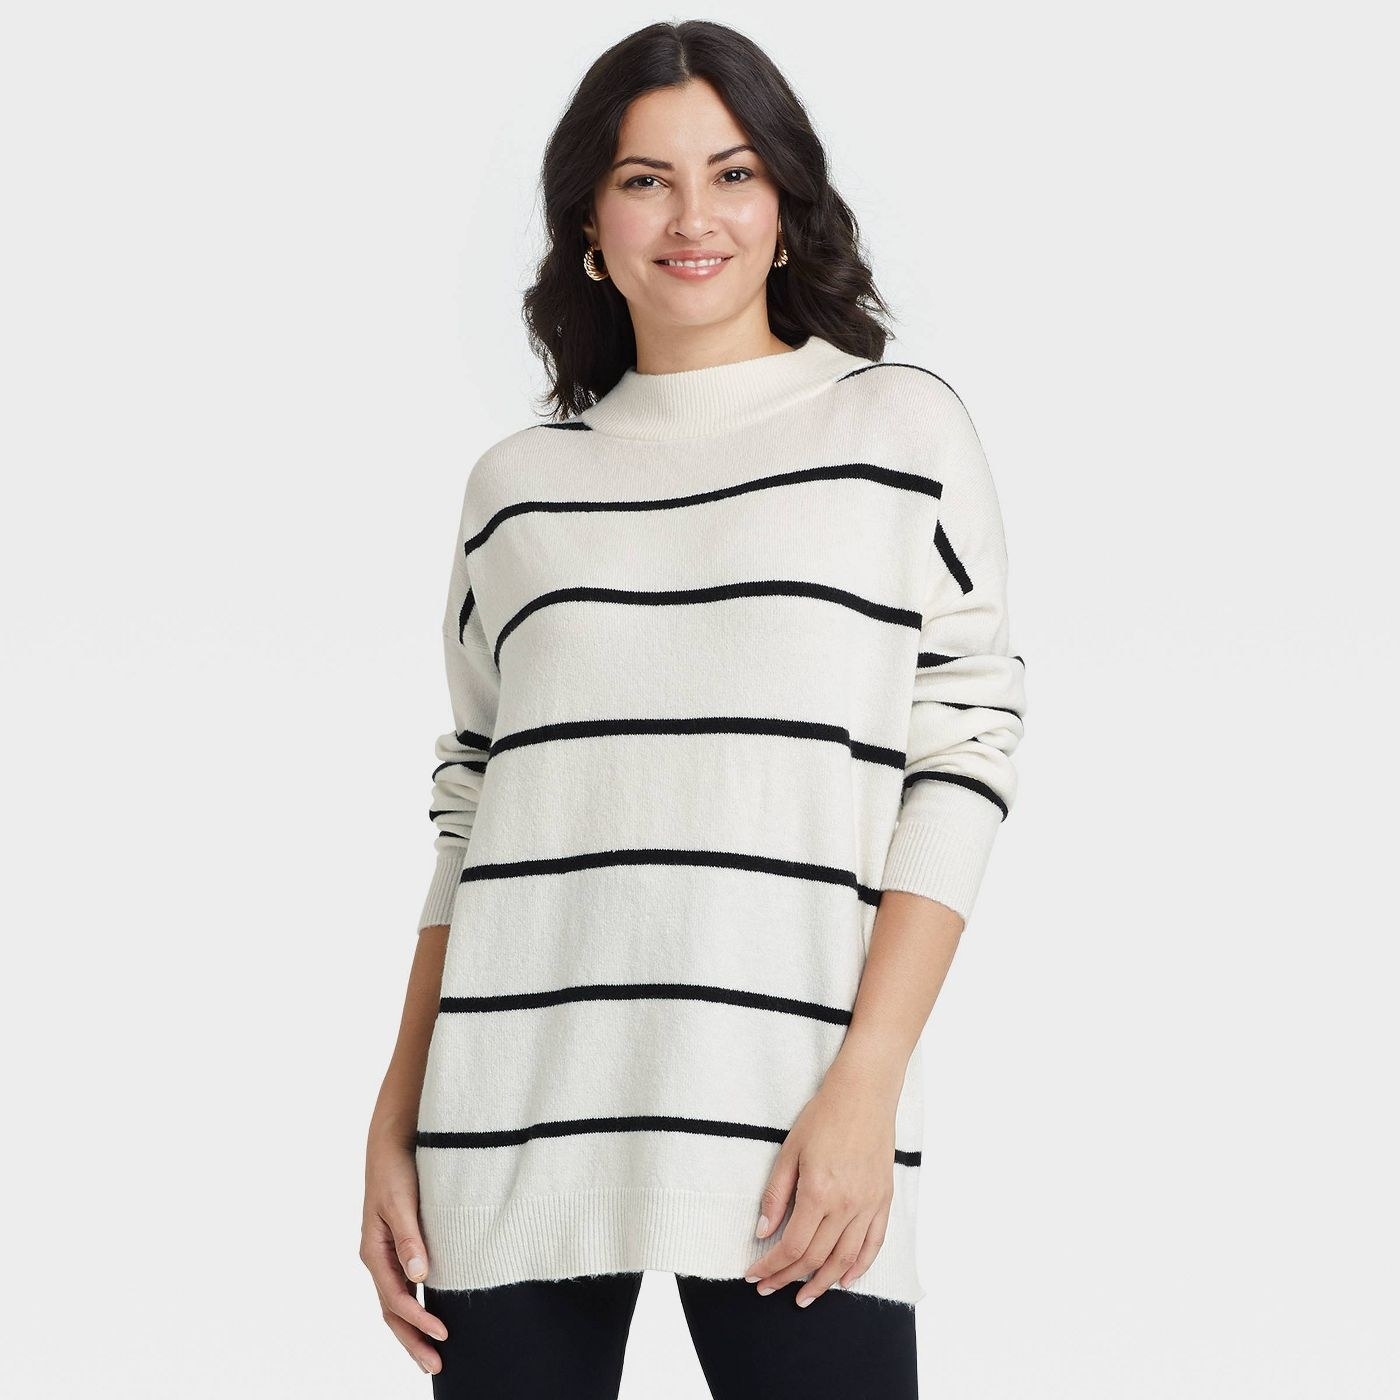 A black and white striped mock turtle neck